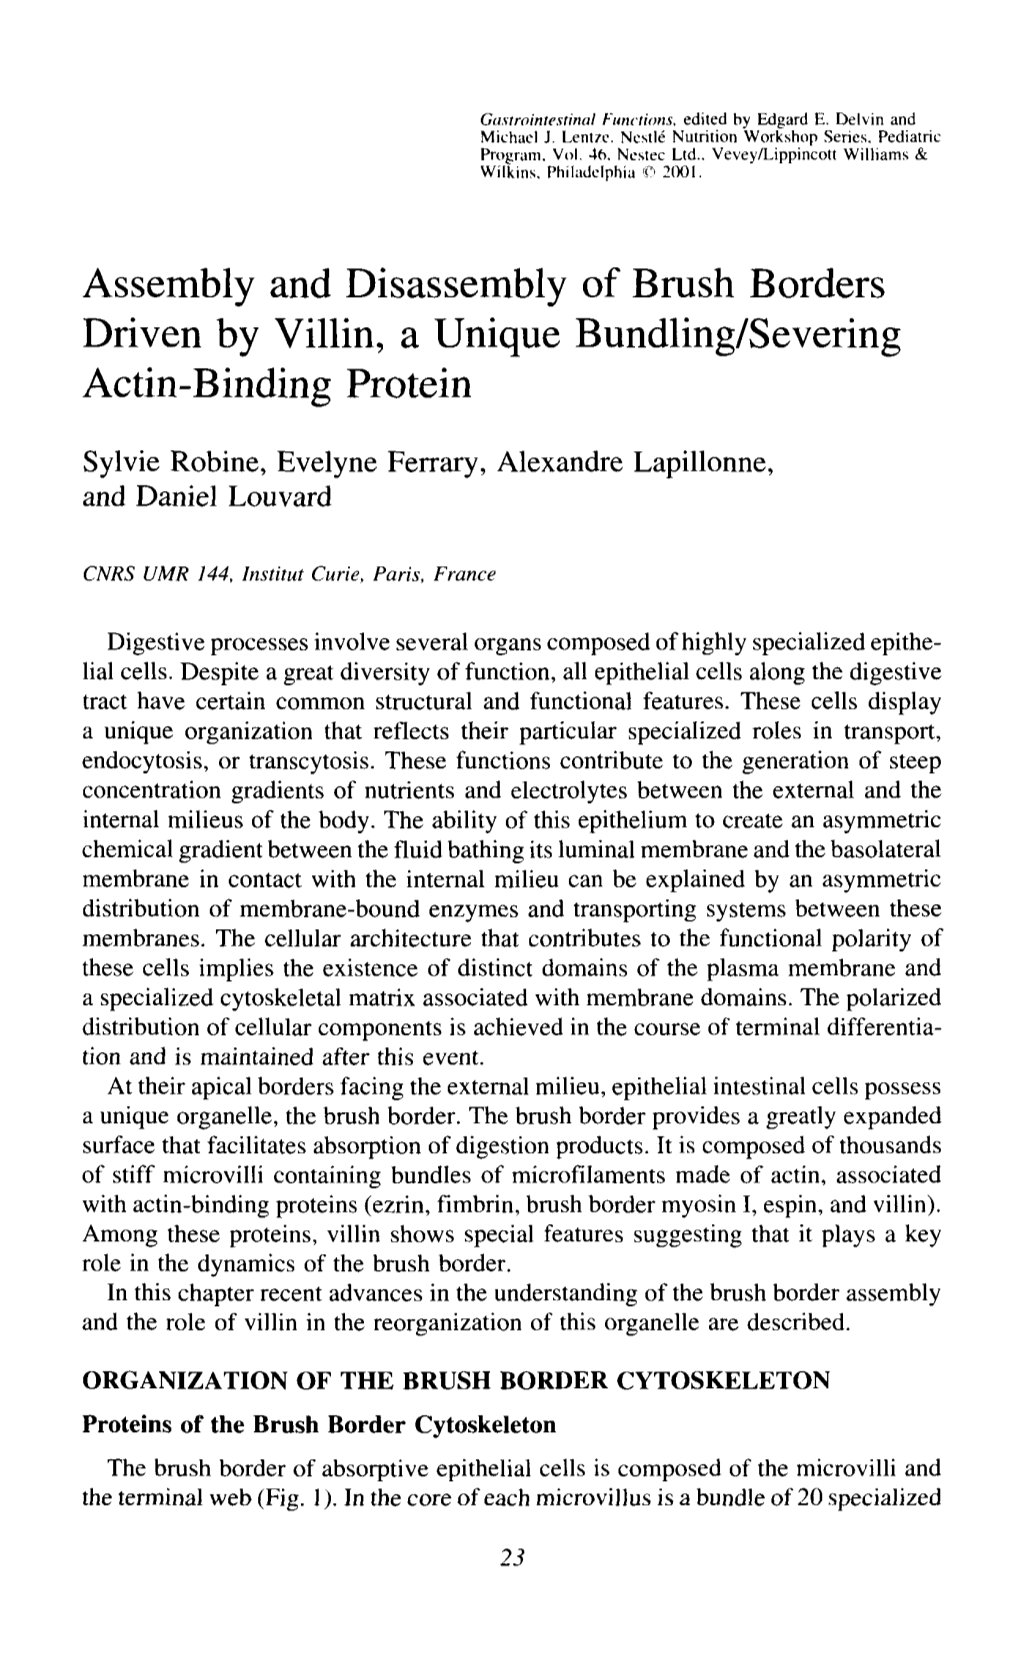 Assembly and Disassembly of Brush Borders Driven by Villin, a Unique Bundling/Severing Actin-Binding Protein